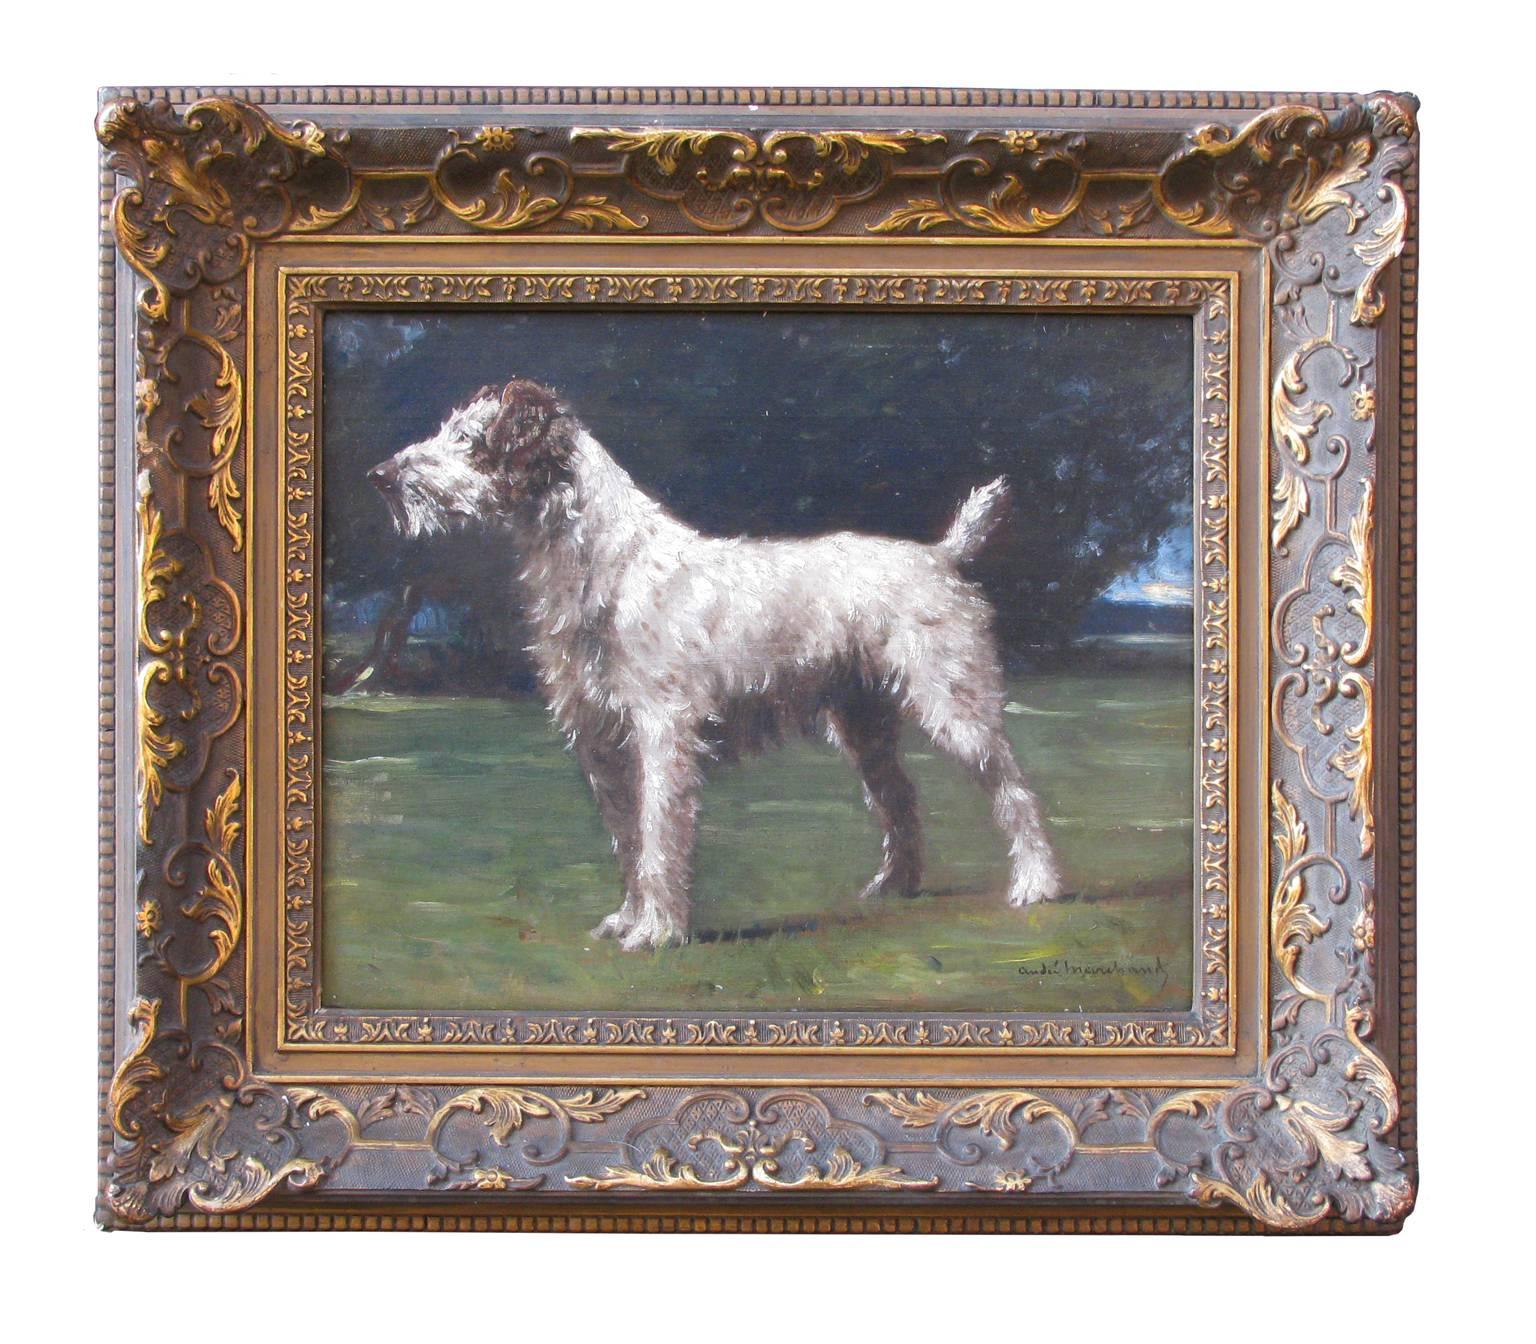 1. Oil on panel by French painter André Marchand (1877-1951).Signed                  
    lower right. Painted circa the year 1910. Beautiful antique frame.
    Sizes with frame : height 21 inches ; width 24 inches

2. Oil on panel by Belgium